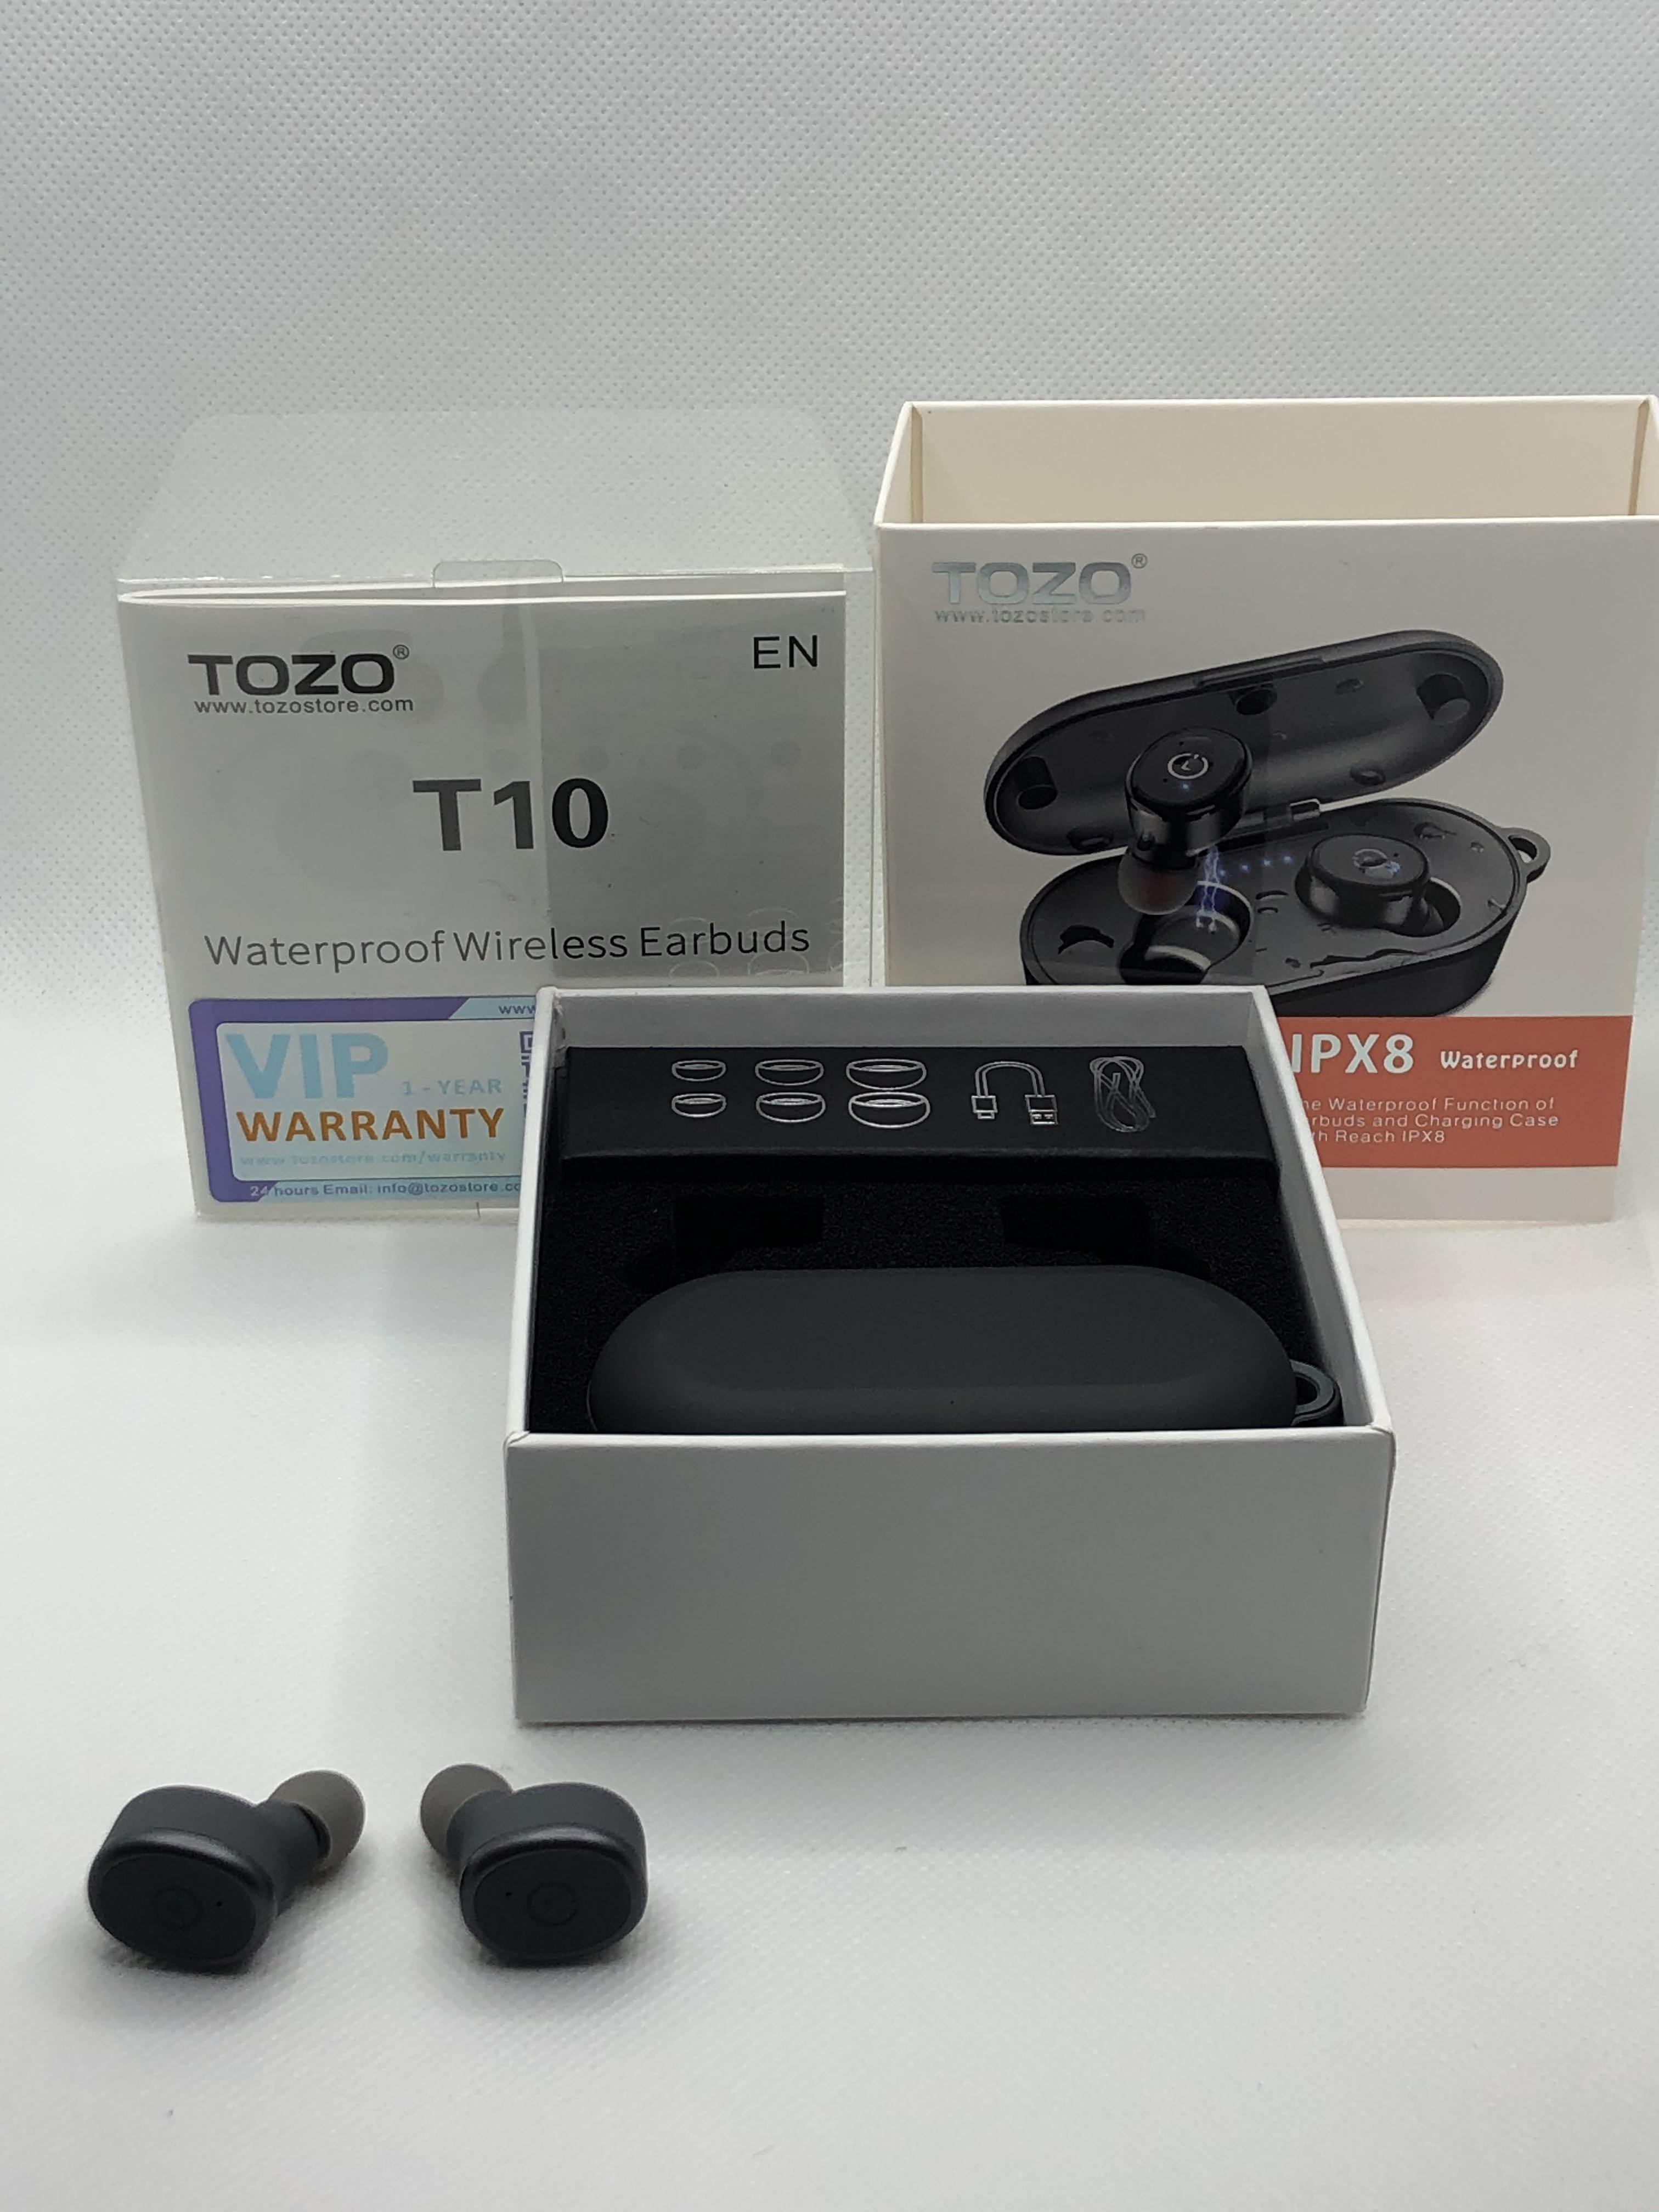 TOZO T10 Bluetooth Wireless Earbuds with Wireless Charging Case